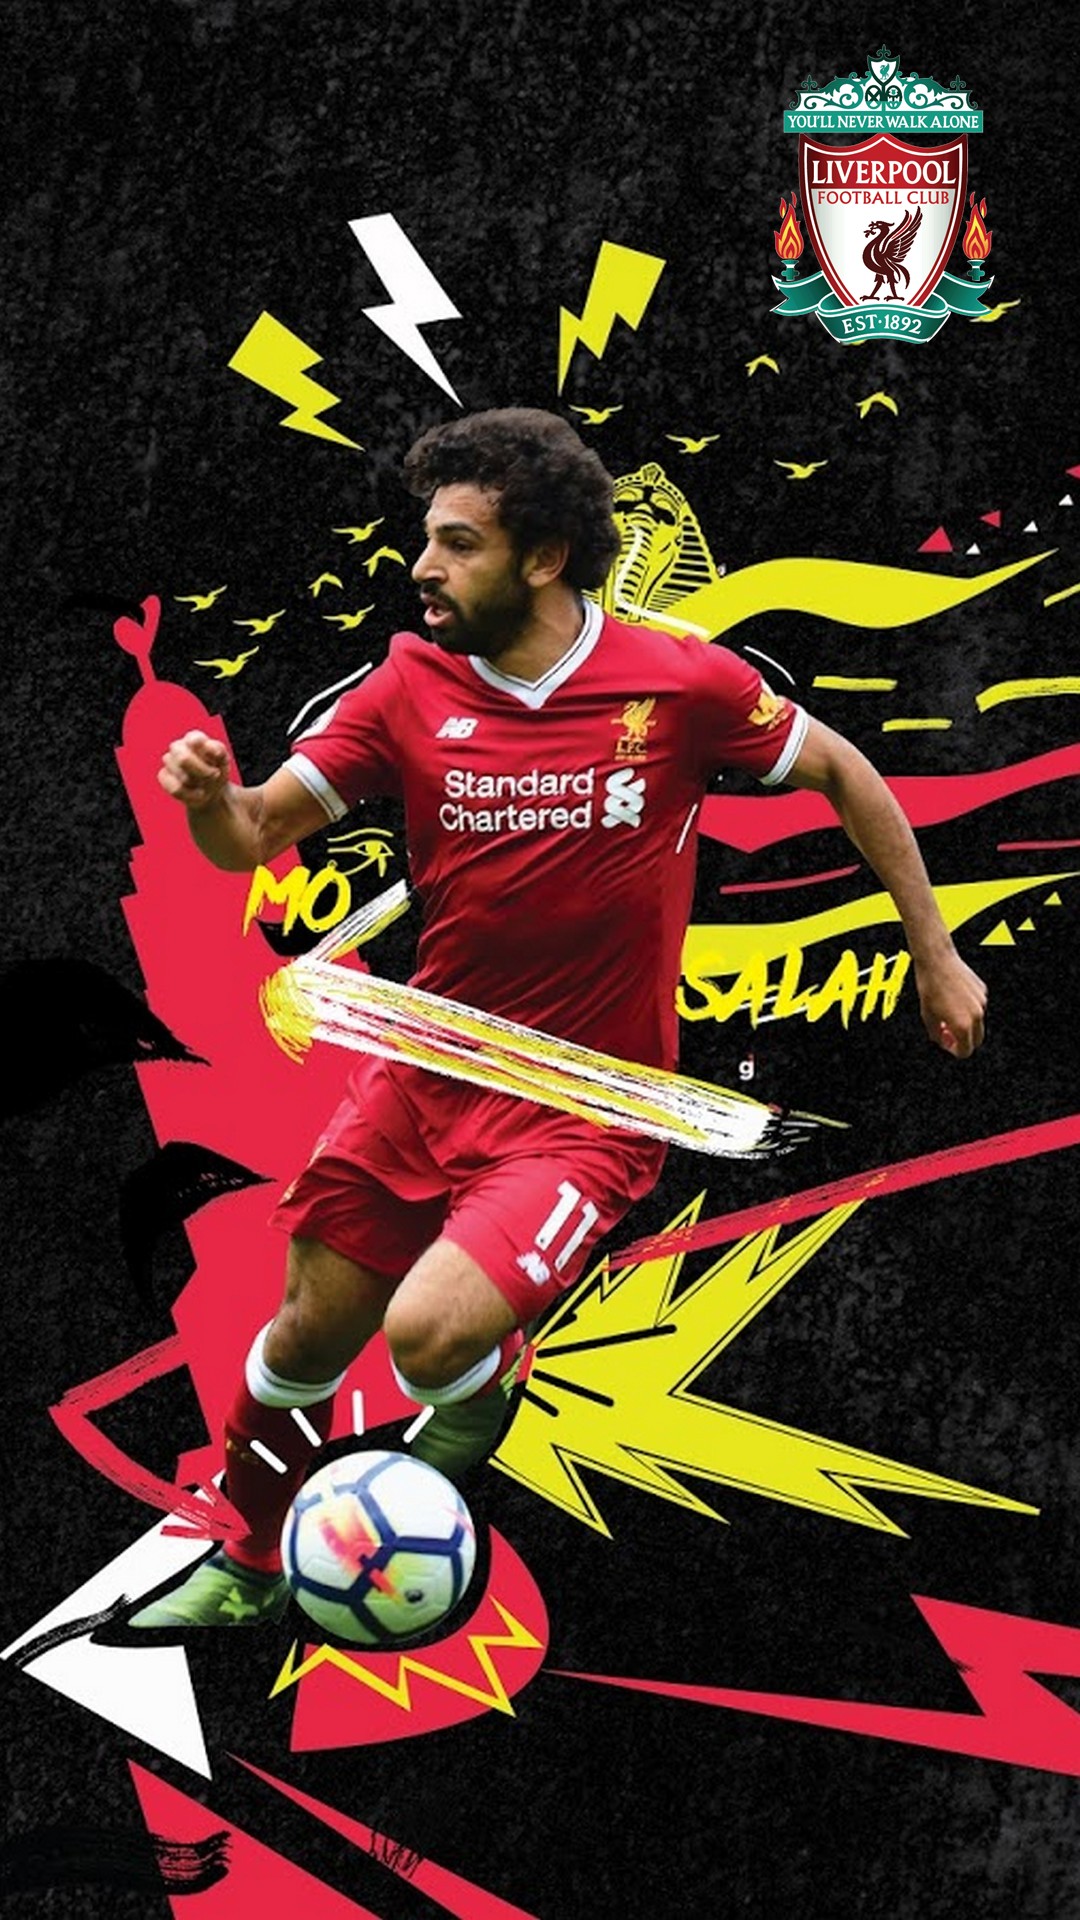 Mohamed Salah Pictures Wallpaper Android with image resolution 1080x1920 pixel. You can make this wallpaper for your Android backgrounds, Tablet, Smartphones Screensavers and Mobile Phone Lock Screen